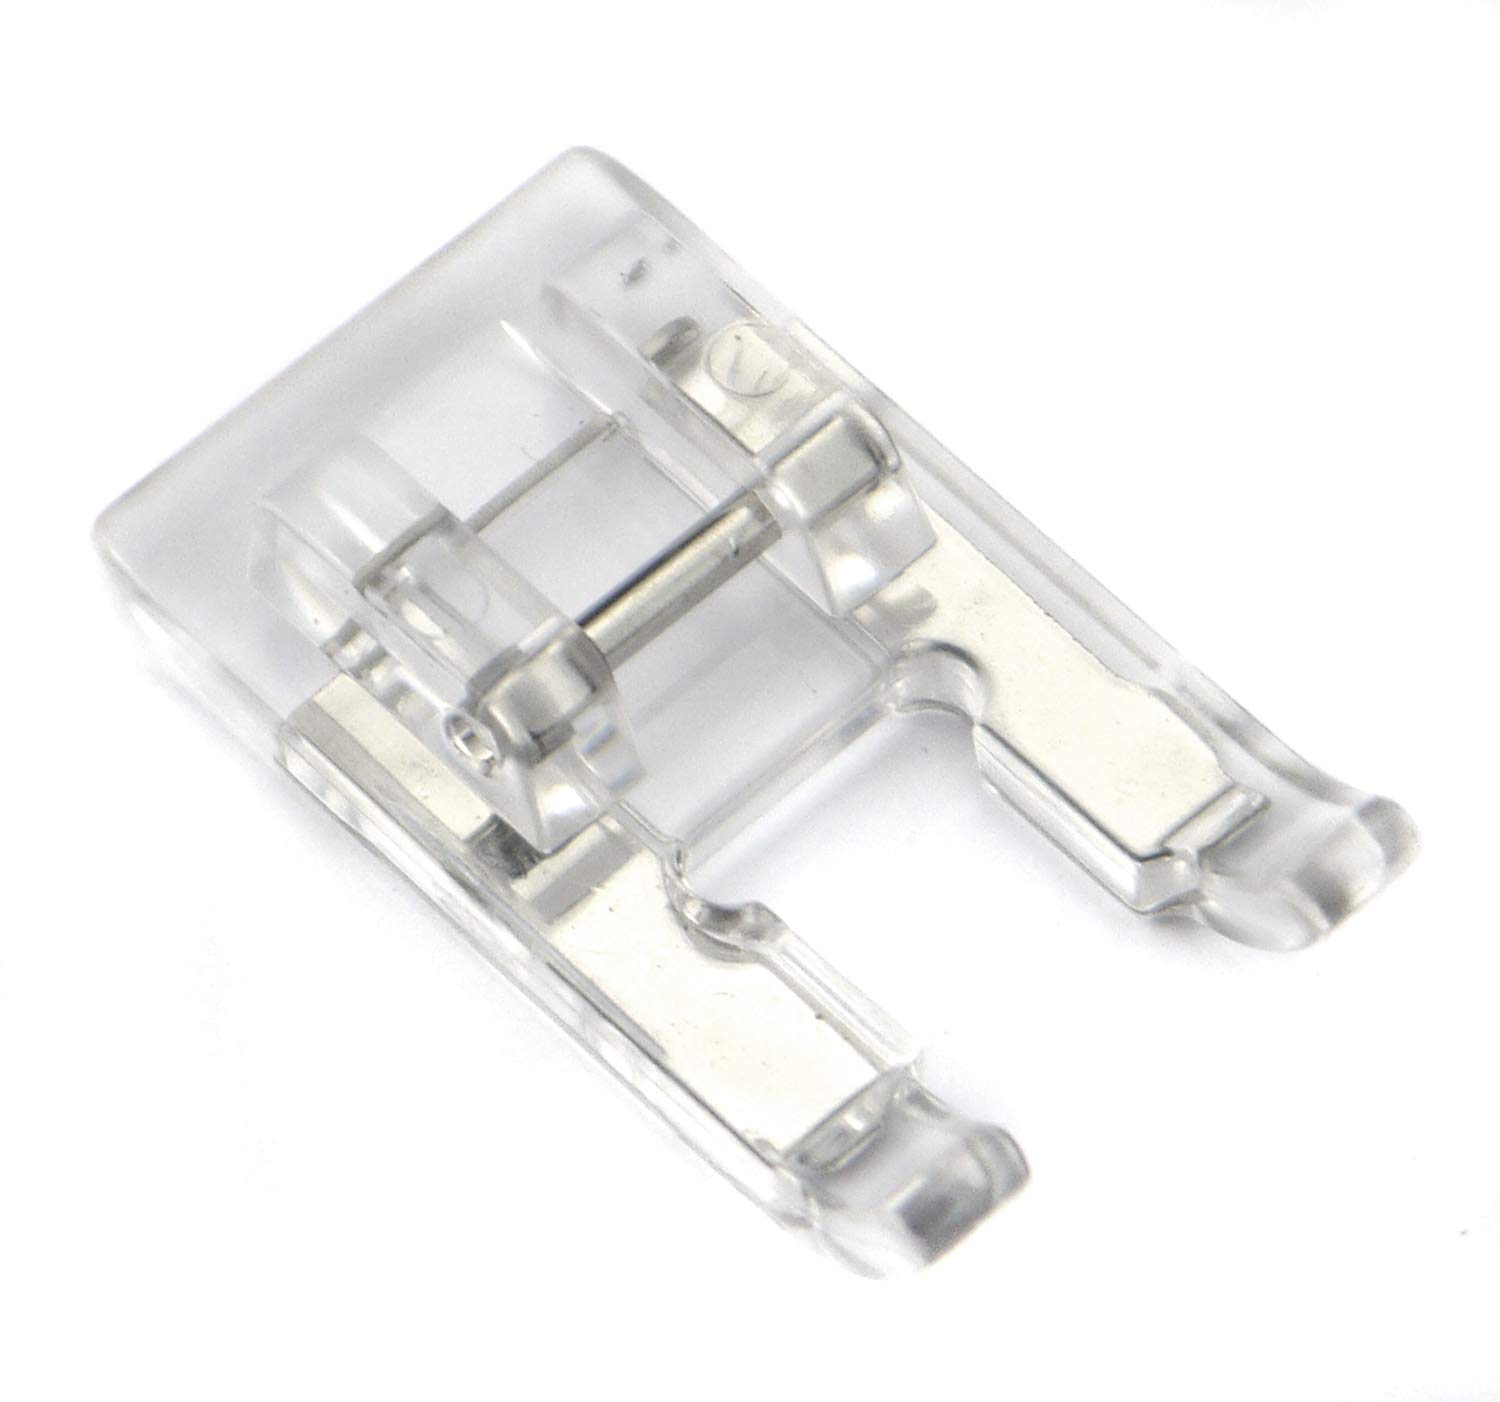 DREAMSTITCH 5mm Clear Open Toe Satin Stitch Presser Foot for All Low Shank Snap-On Singer, Brother, Babylock,Euro-Pro,Janome,Kenmore,White,Juki,New Home,Simplicity,Elna Sewing Machine